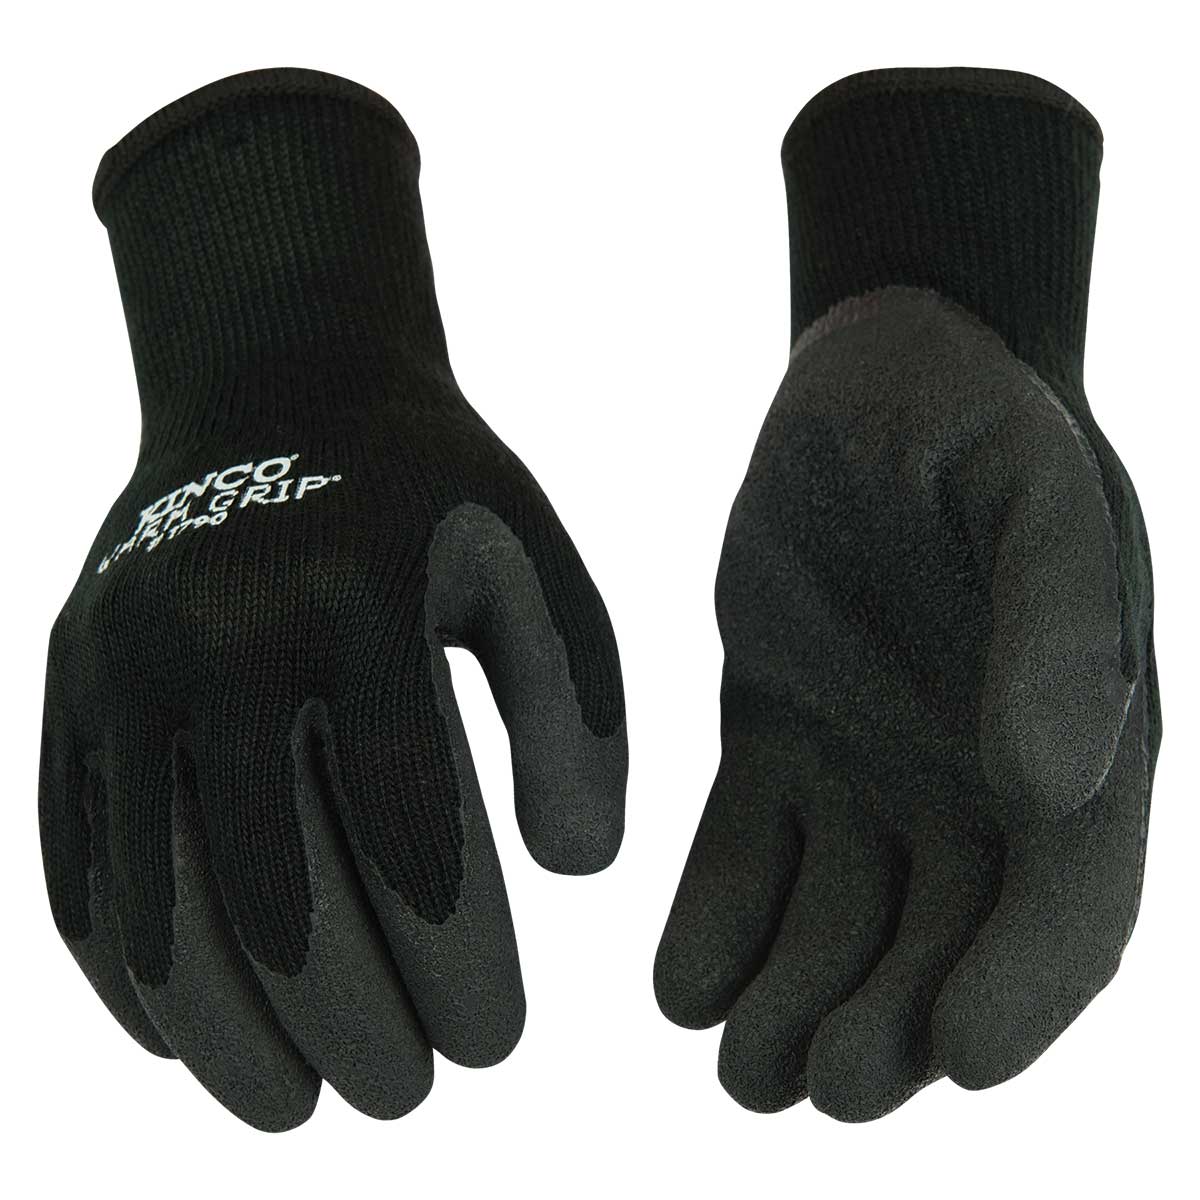 Kinco Thermal Knit, Latex Palm Work Gloves